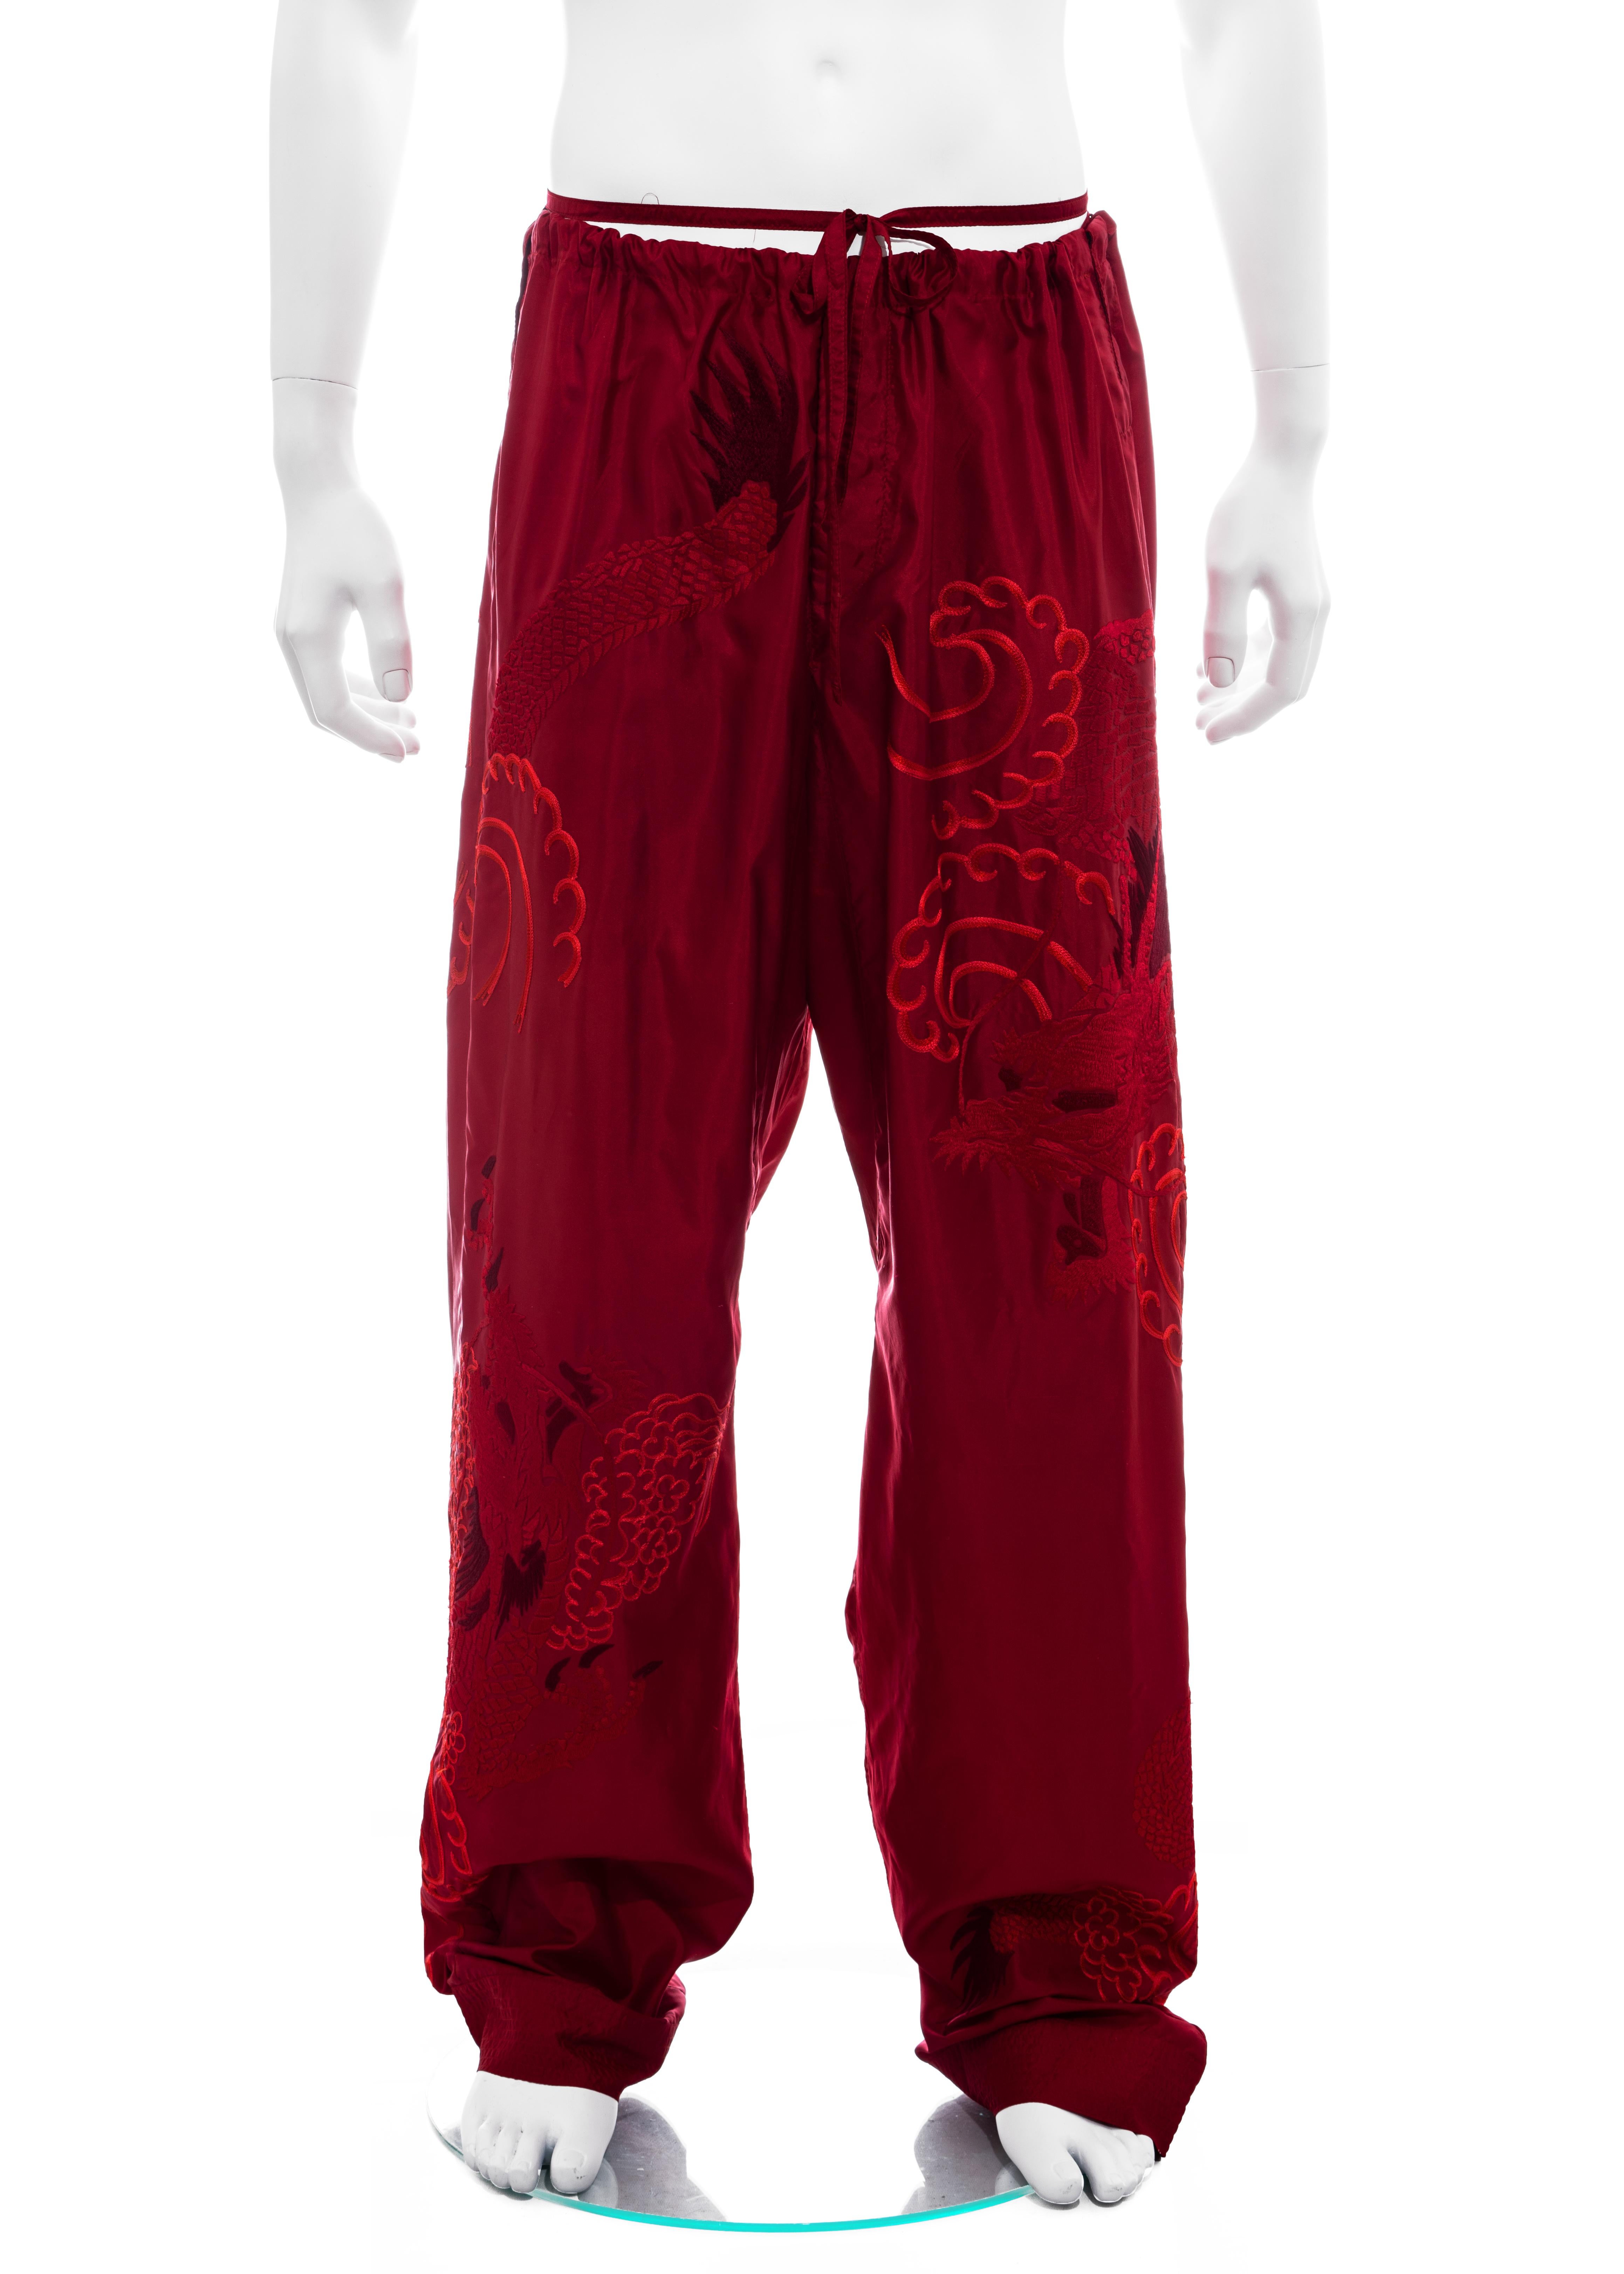 ▪ Men's Gucci red silk drawstring pants 
▪ Designed by Tom Ford
▪ 100% Silk
▪ Wide leg 
▪ Embroidered dragon design 
▪ Size 52 - Extra Large
▪ Spring-Summer 2001